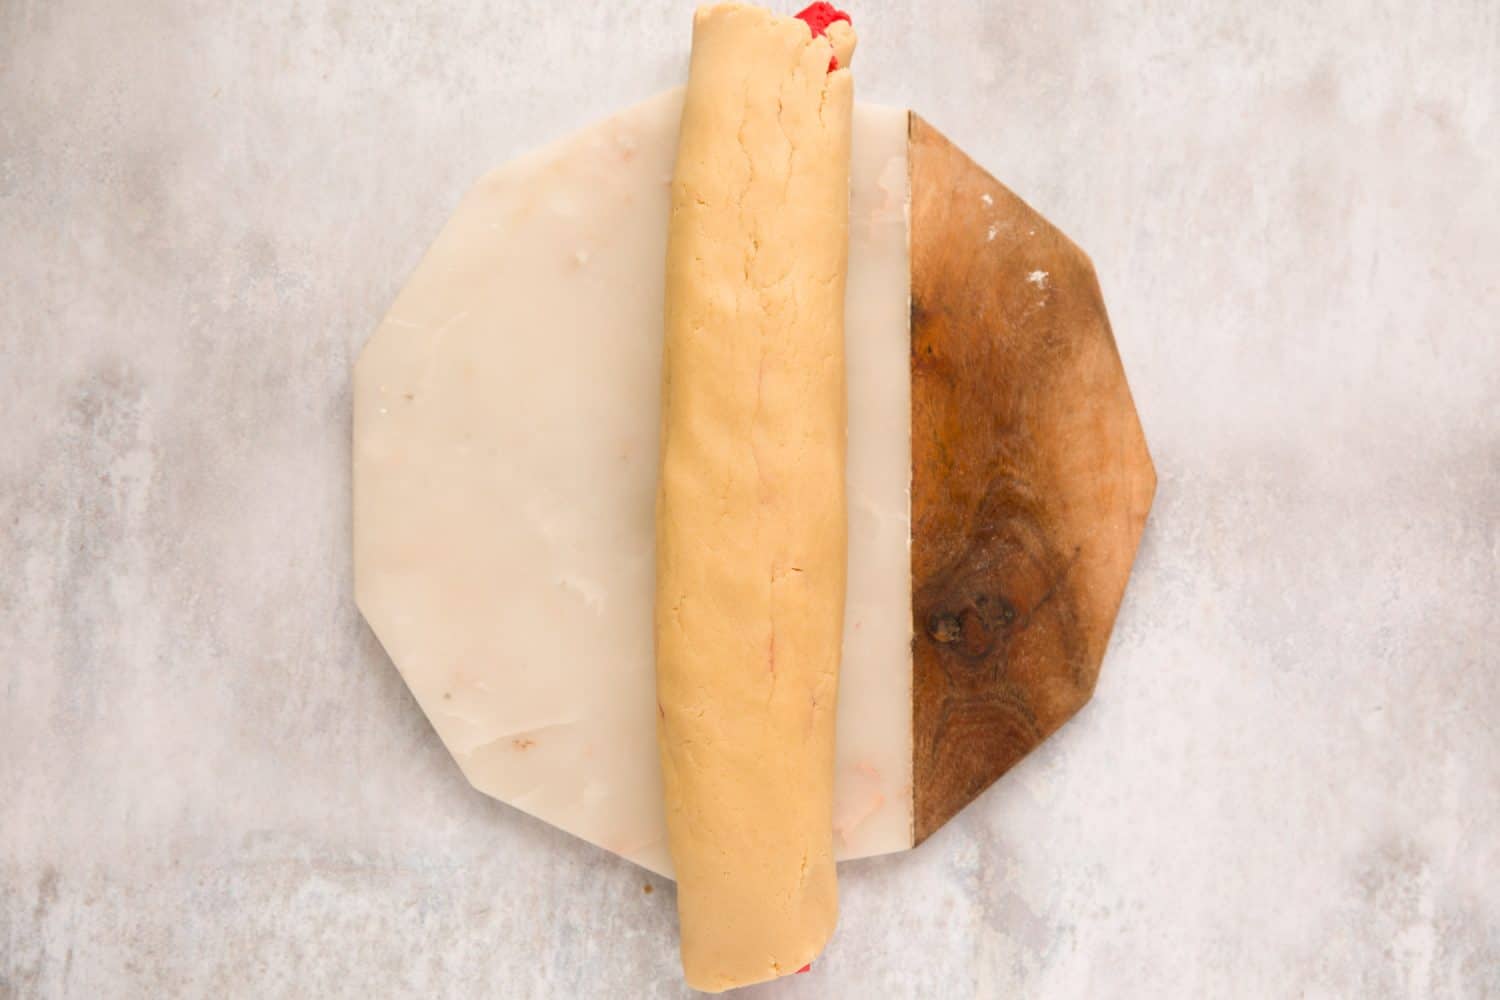 Biscuit dough that has been rolled into a sausage shape.